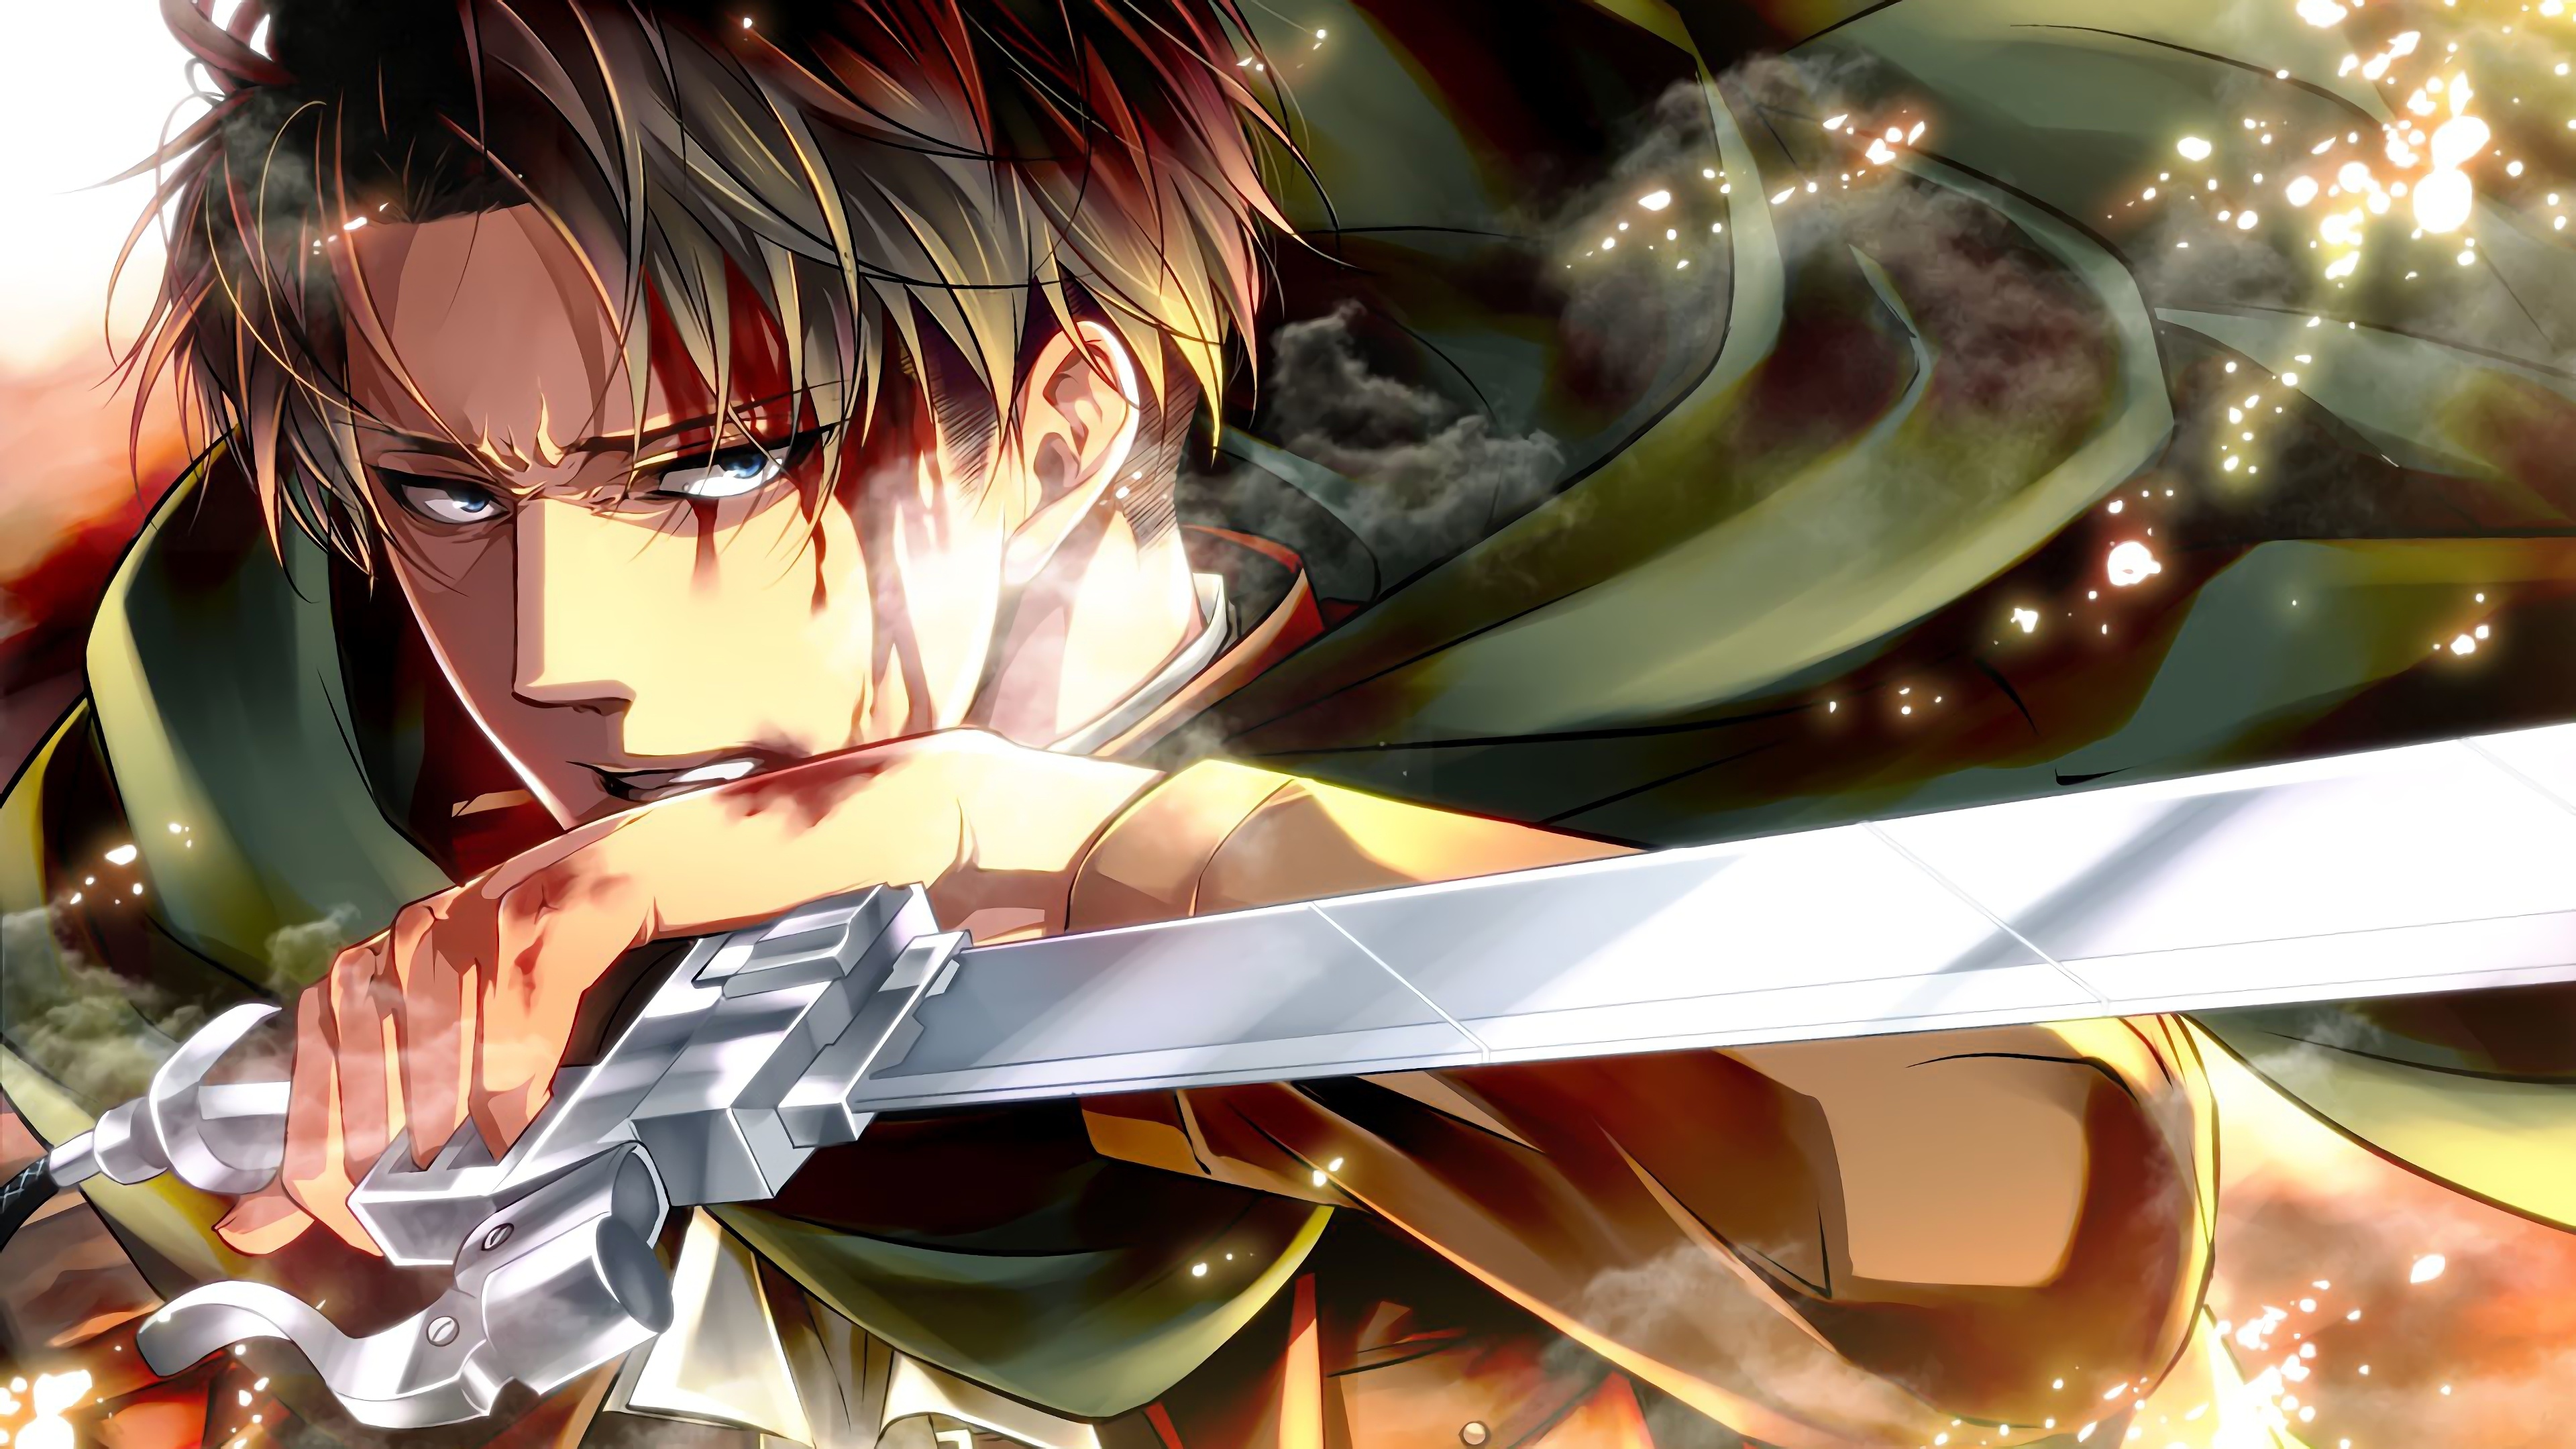 Levi Ackerman, Anime wallpapers, Fearless soldier, Mysterious past, 3840x2160 4K Desktop